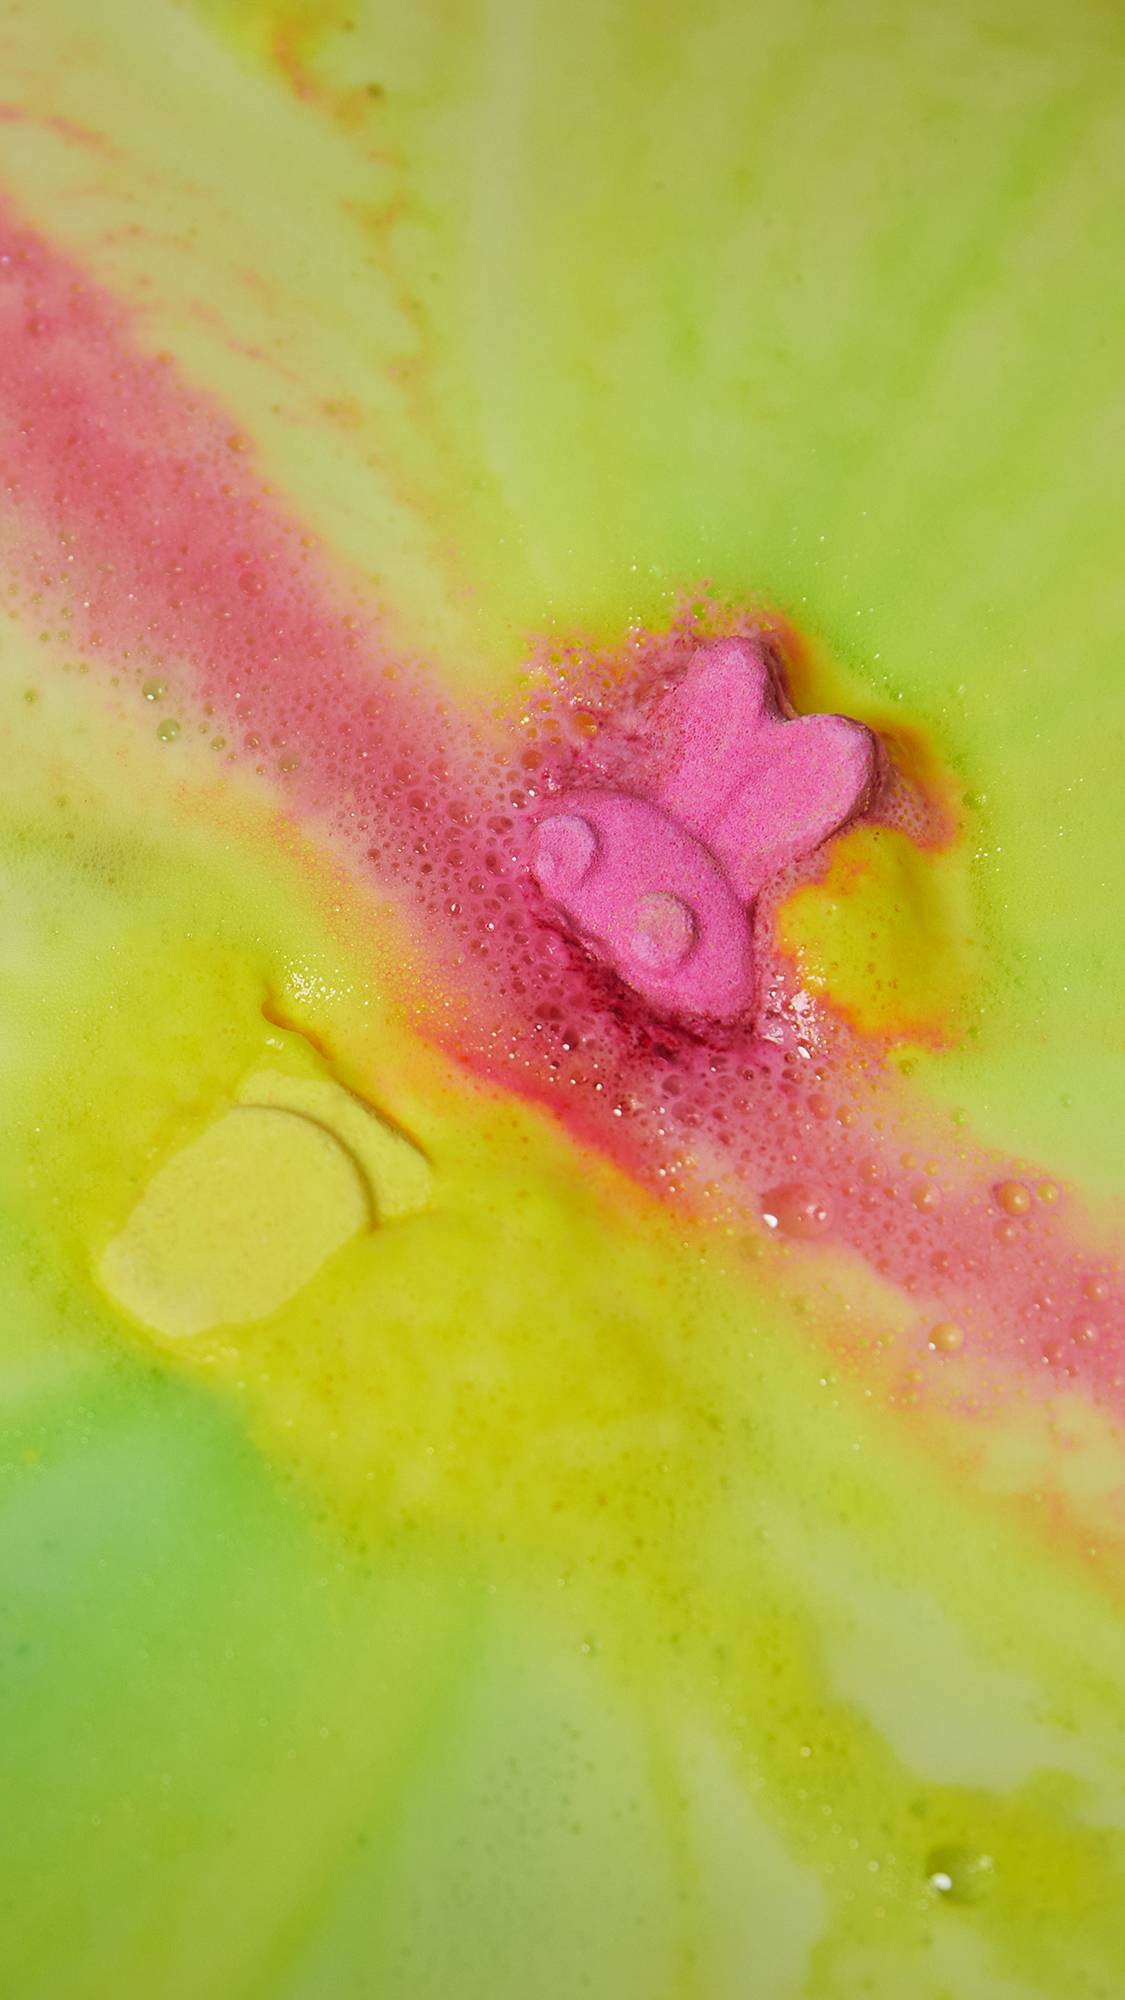 Alien Bunny Spaceship is slowly fizzing away in the bath water shooting off foamy swirls of bright yellow and pink.